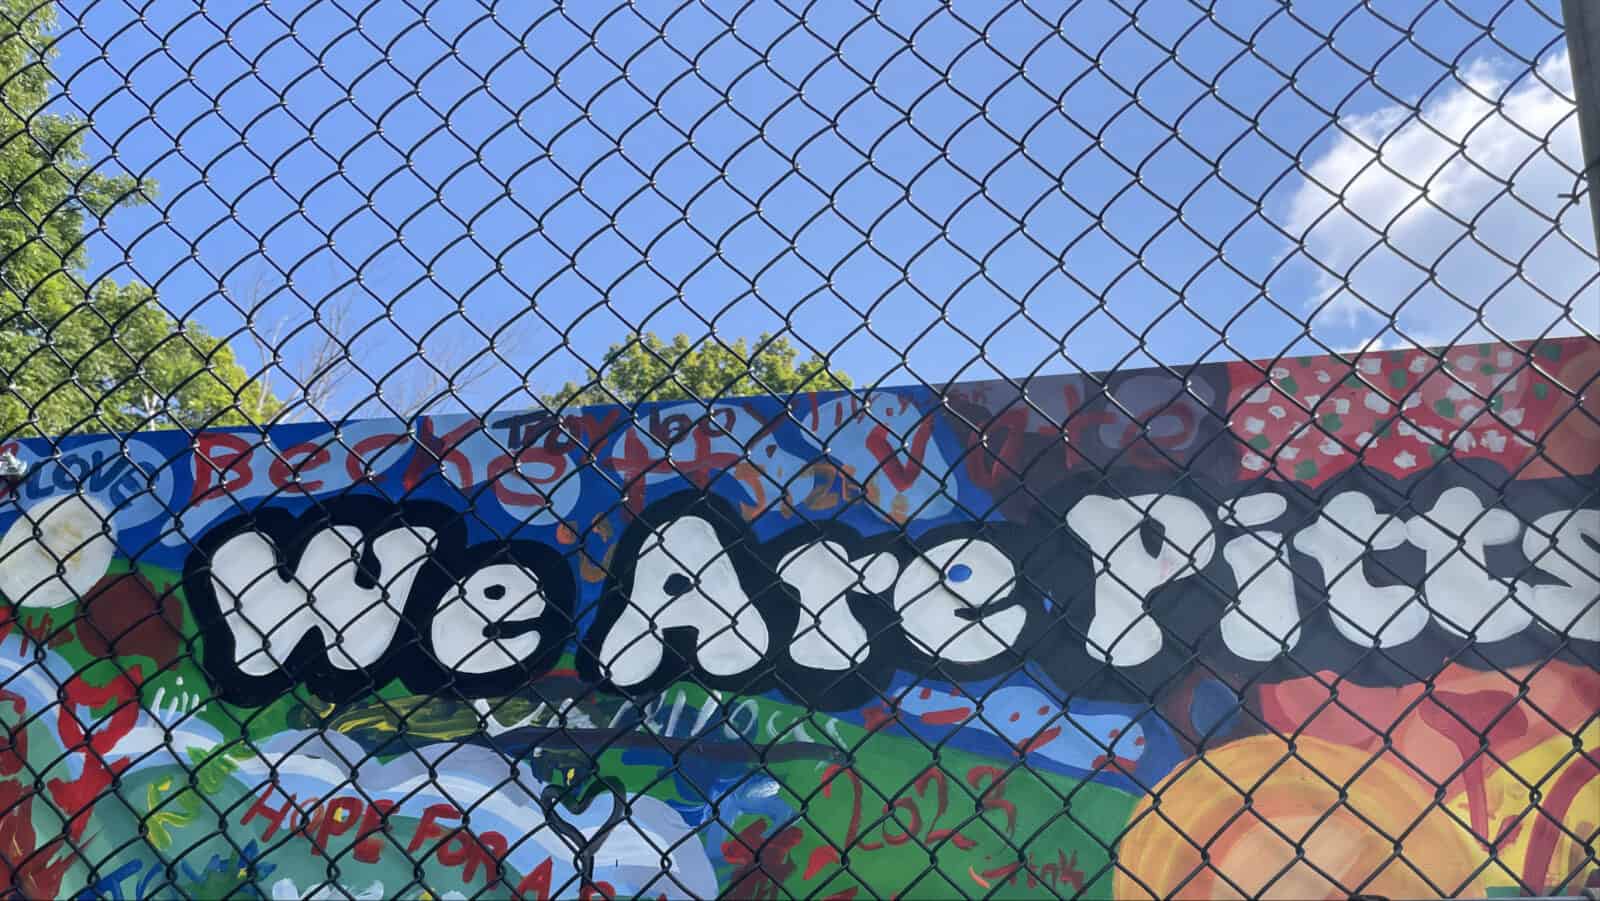 Pittsfield artists have painted murals in Dunham Park including a vividly colorful celebration that reads 'We are Pittsfield,' overlaid by the chain-link fence around the tennis court.